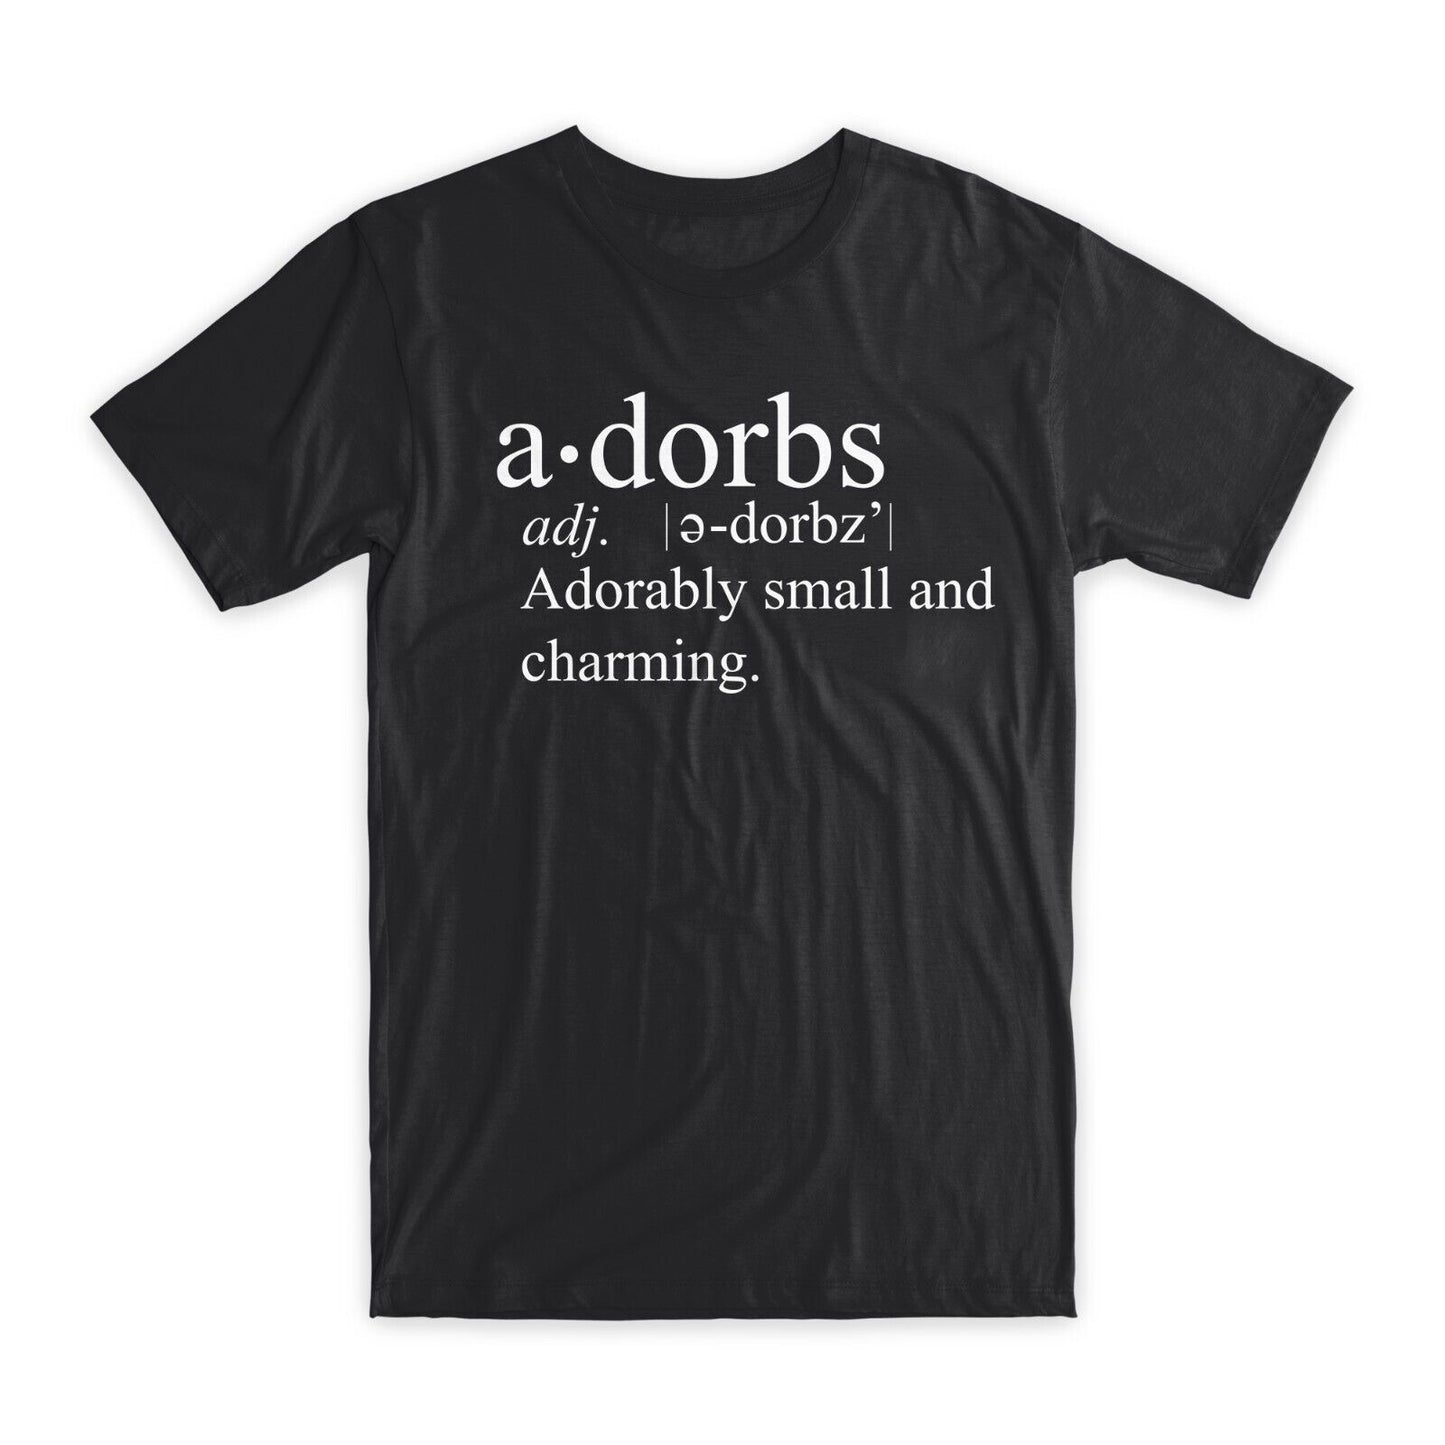 Adorably Small and Charming T-Shirt Premium Cotton Crew Neck Funny Tee Gift NEW